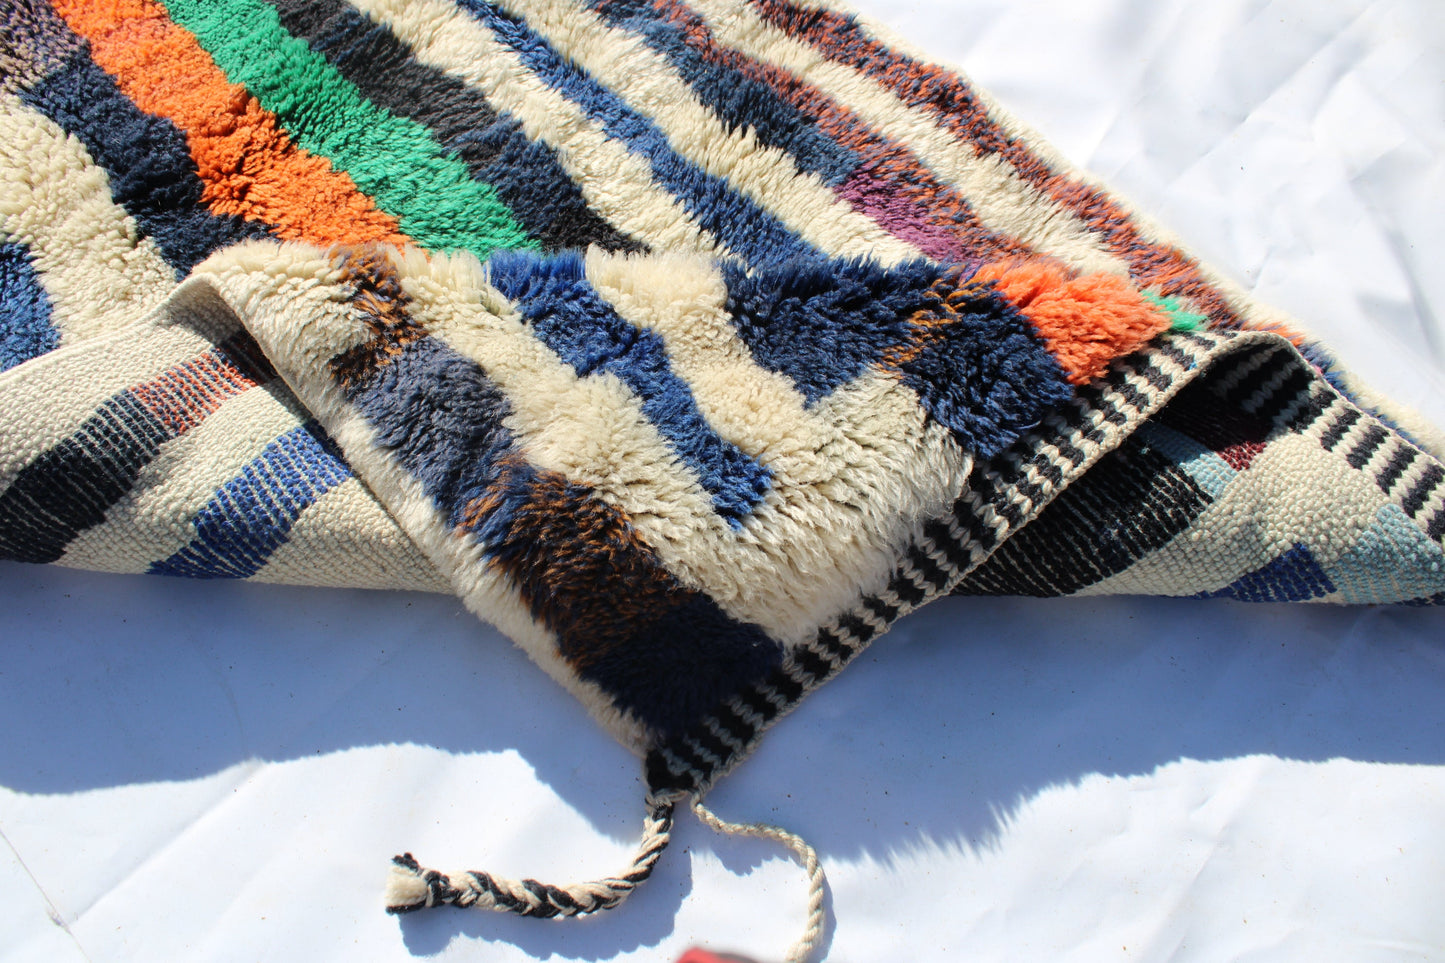 Beni Ourain rugs originate from the Atlas Mountains of Morocco and are characterized by their distinctive, neutral-toned, and geometric designs. These handwoven rugs often feature a plush pile and are made by the Berber tribes,  size is 365x92 cm